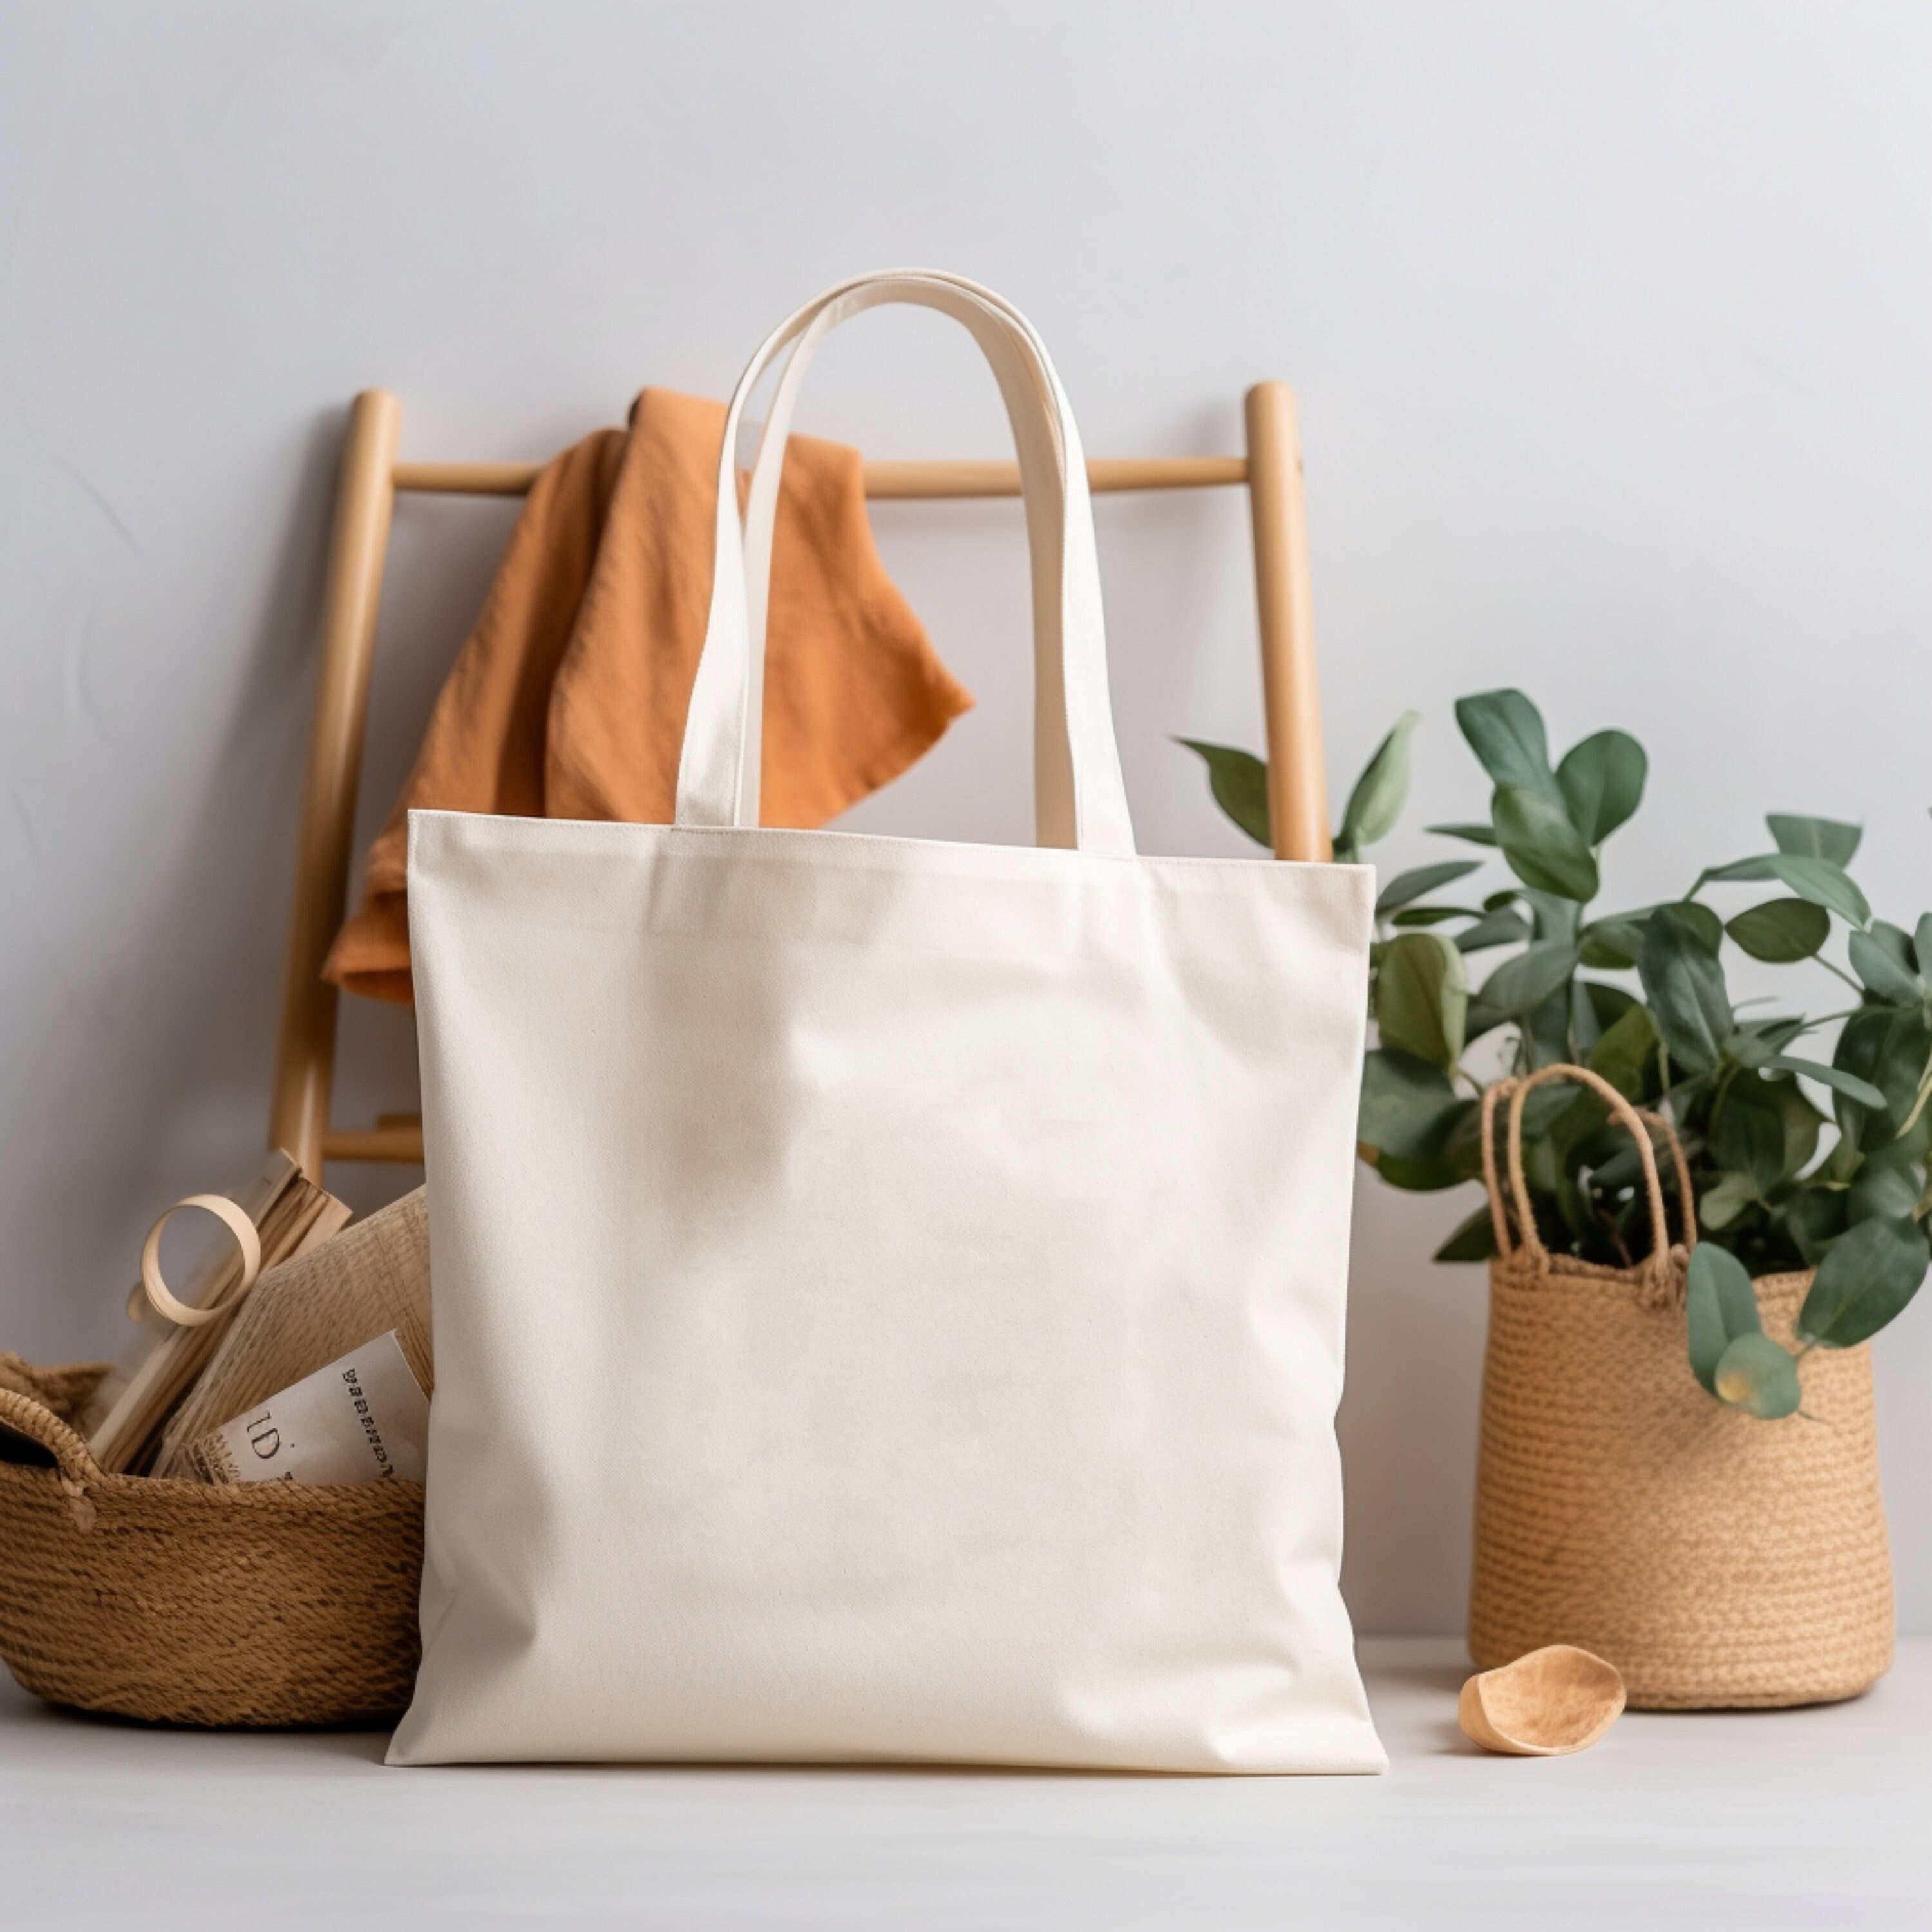 Blank everyday cotton tote bags